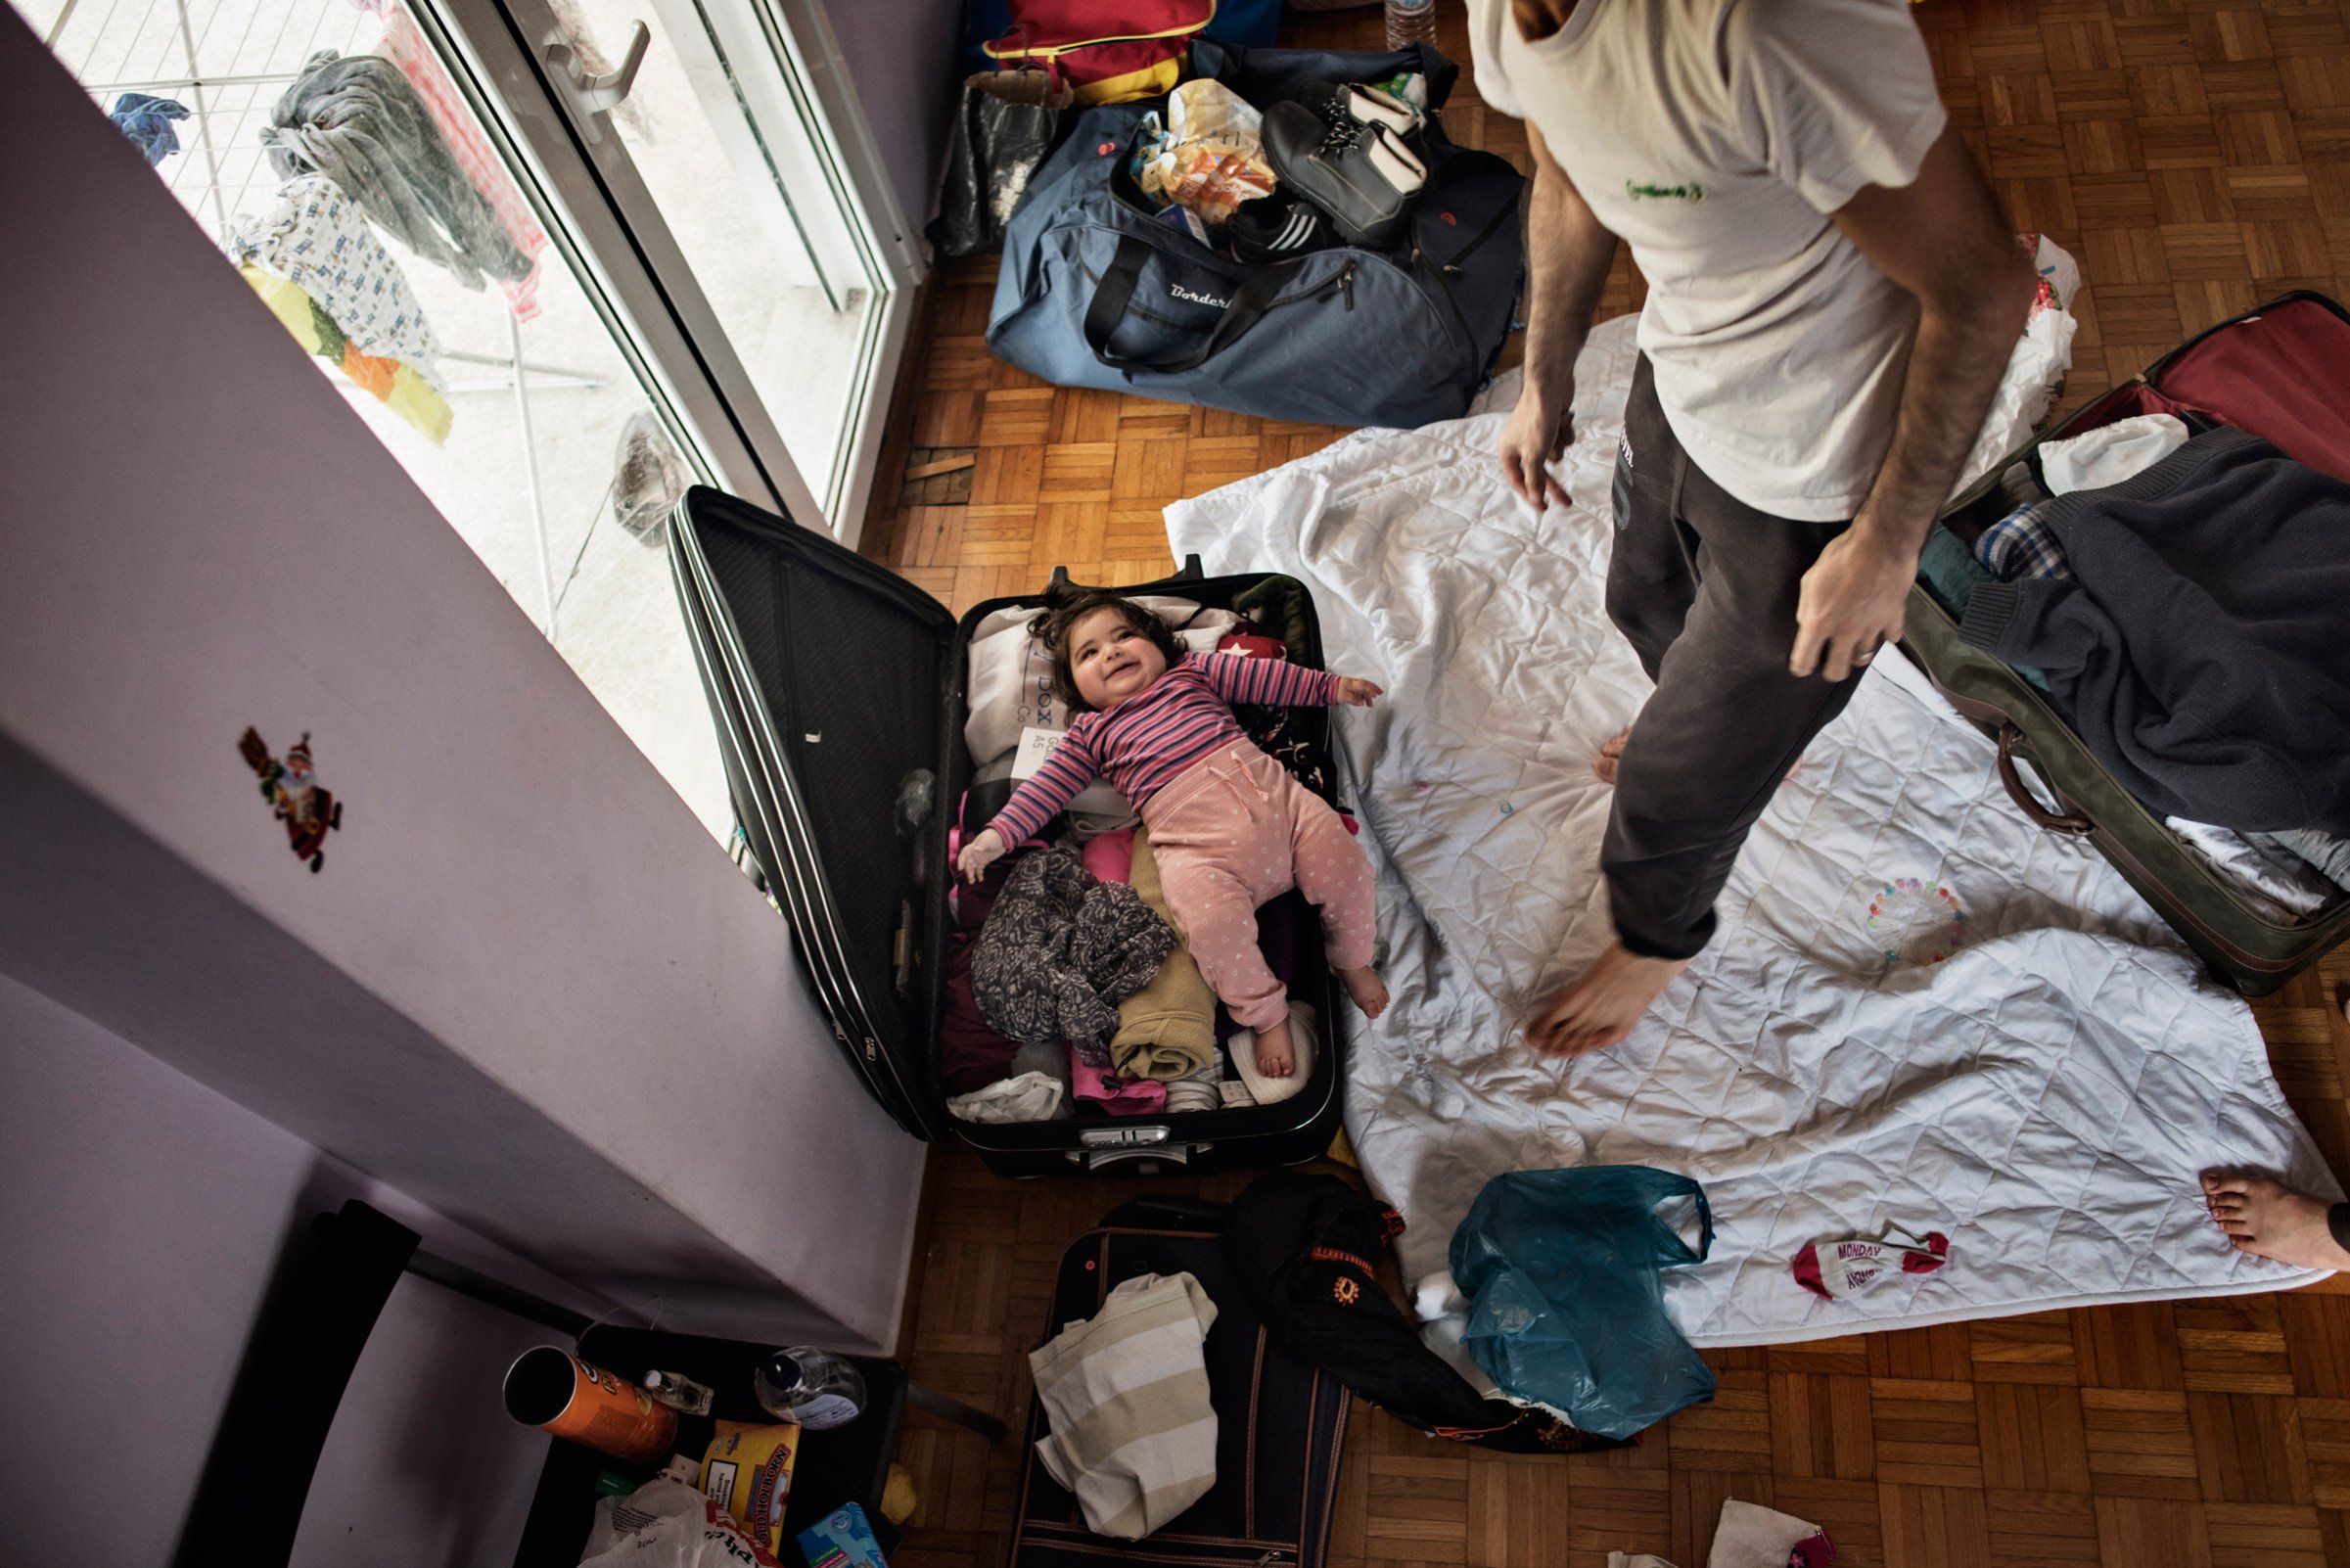 Syrian refugee Muhanned Abzali, jokes with his 6 month old daughter, Heln, by packing her in a suitcase, the night before leaving for relocation in Estonia. Image by Lynsey Addario. Greece, 2017. 